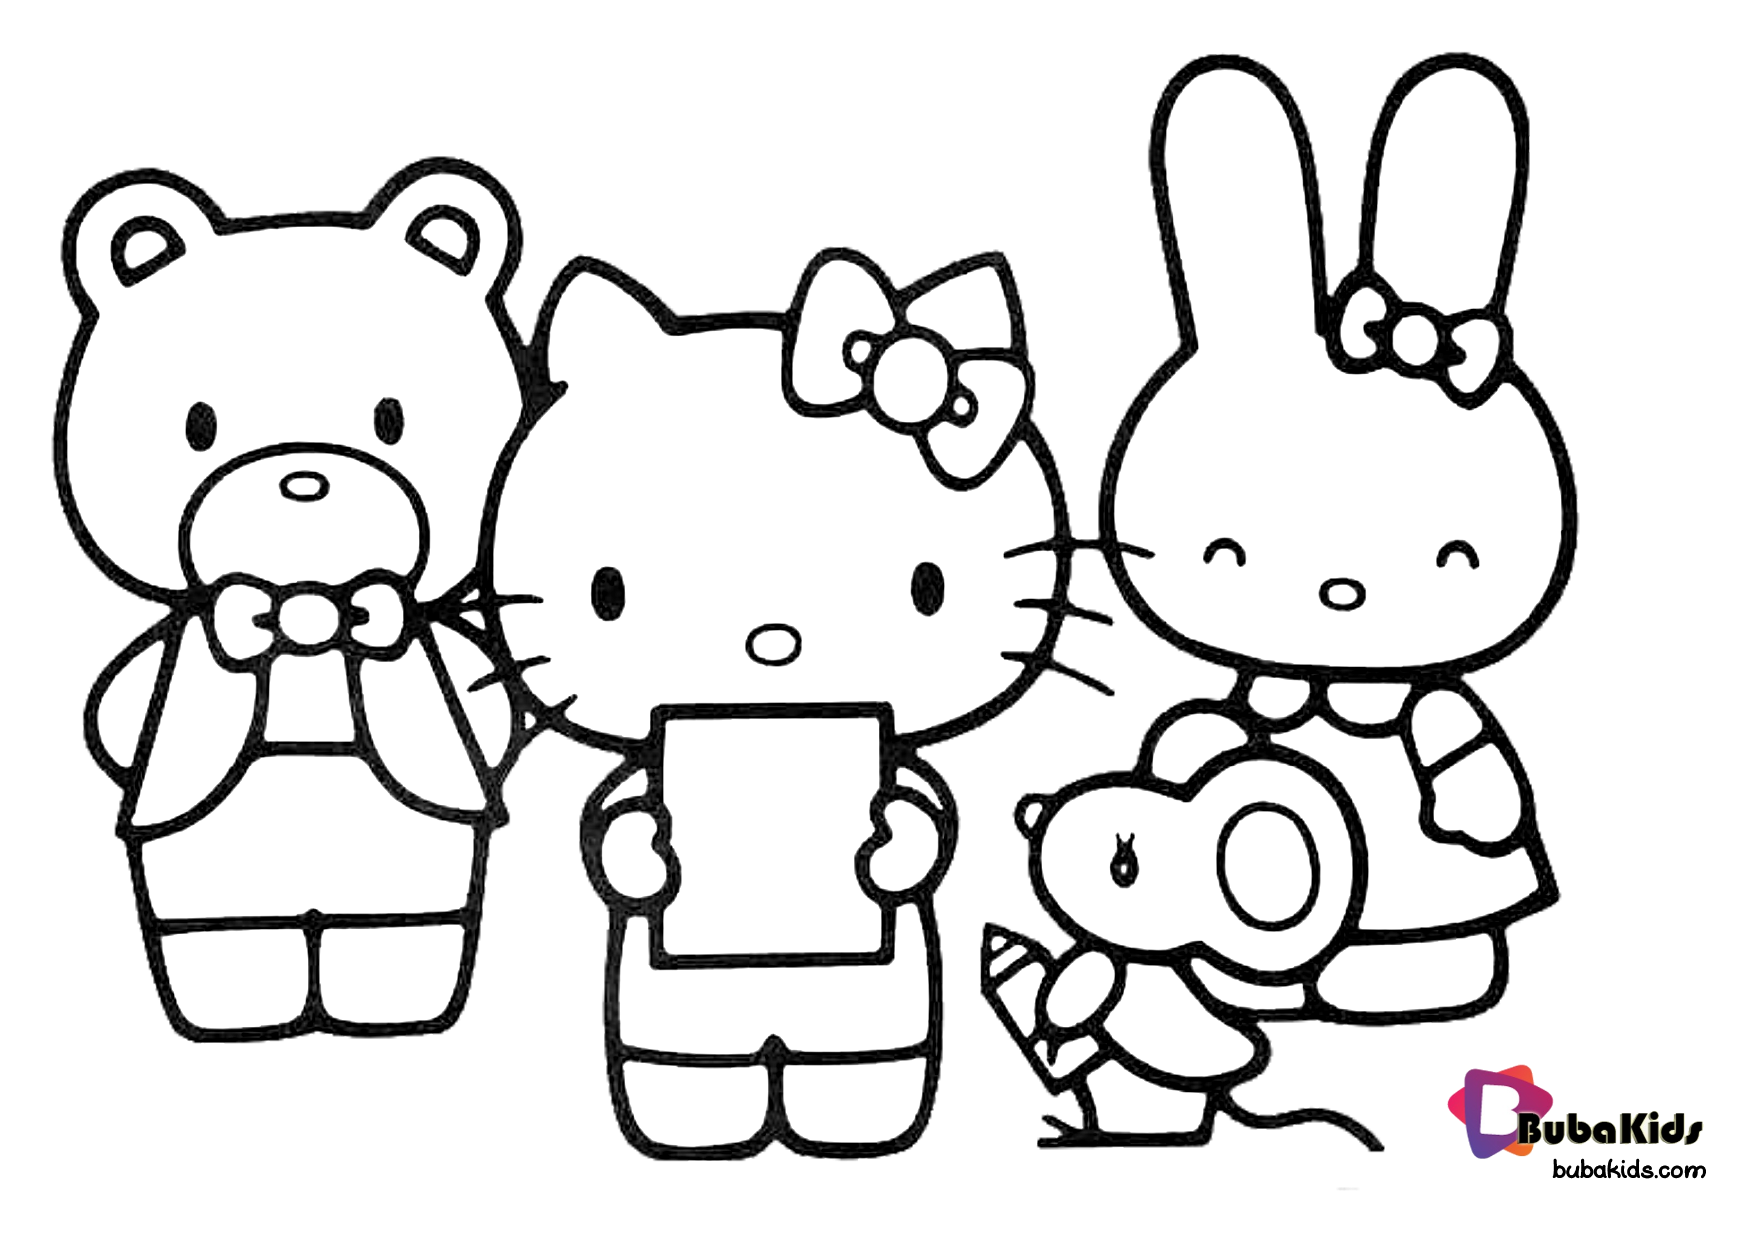 Hello kitty and friends coloring picture.